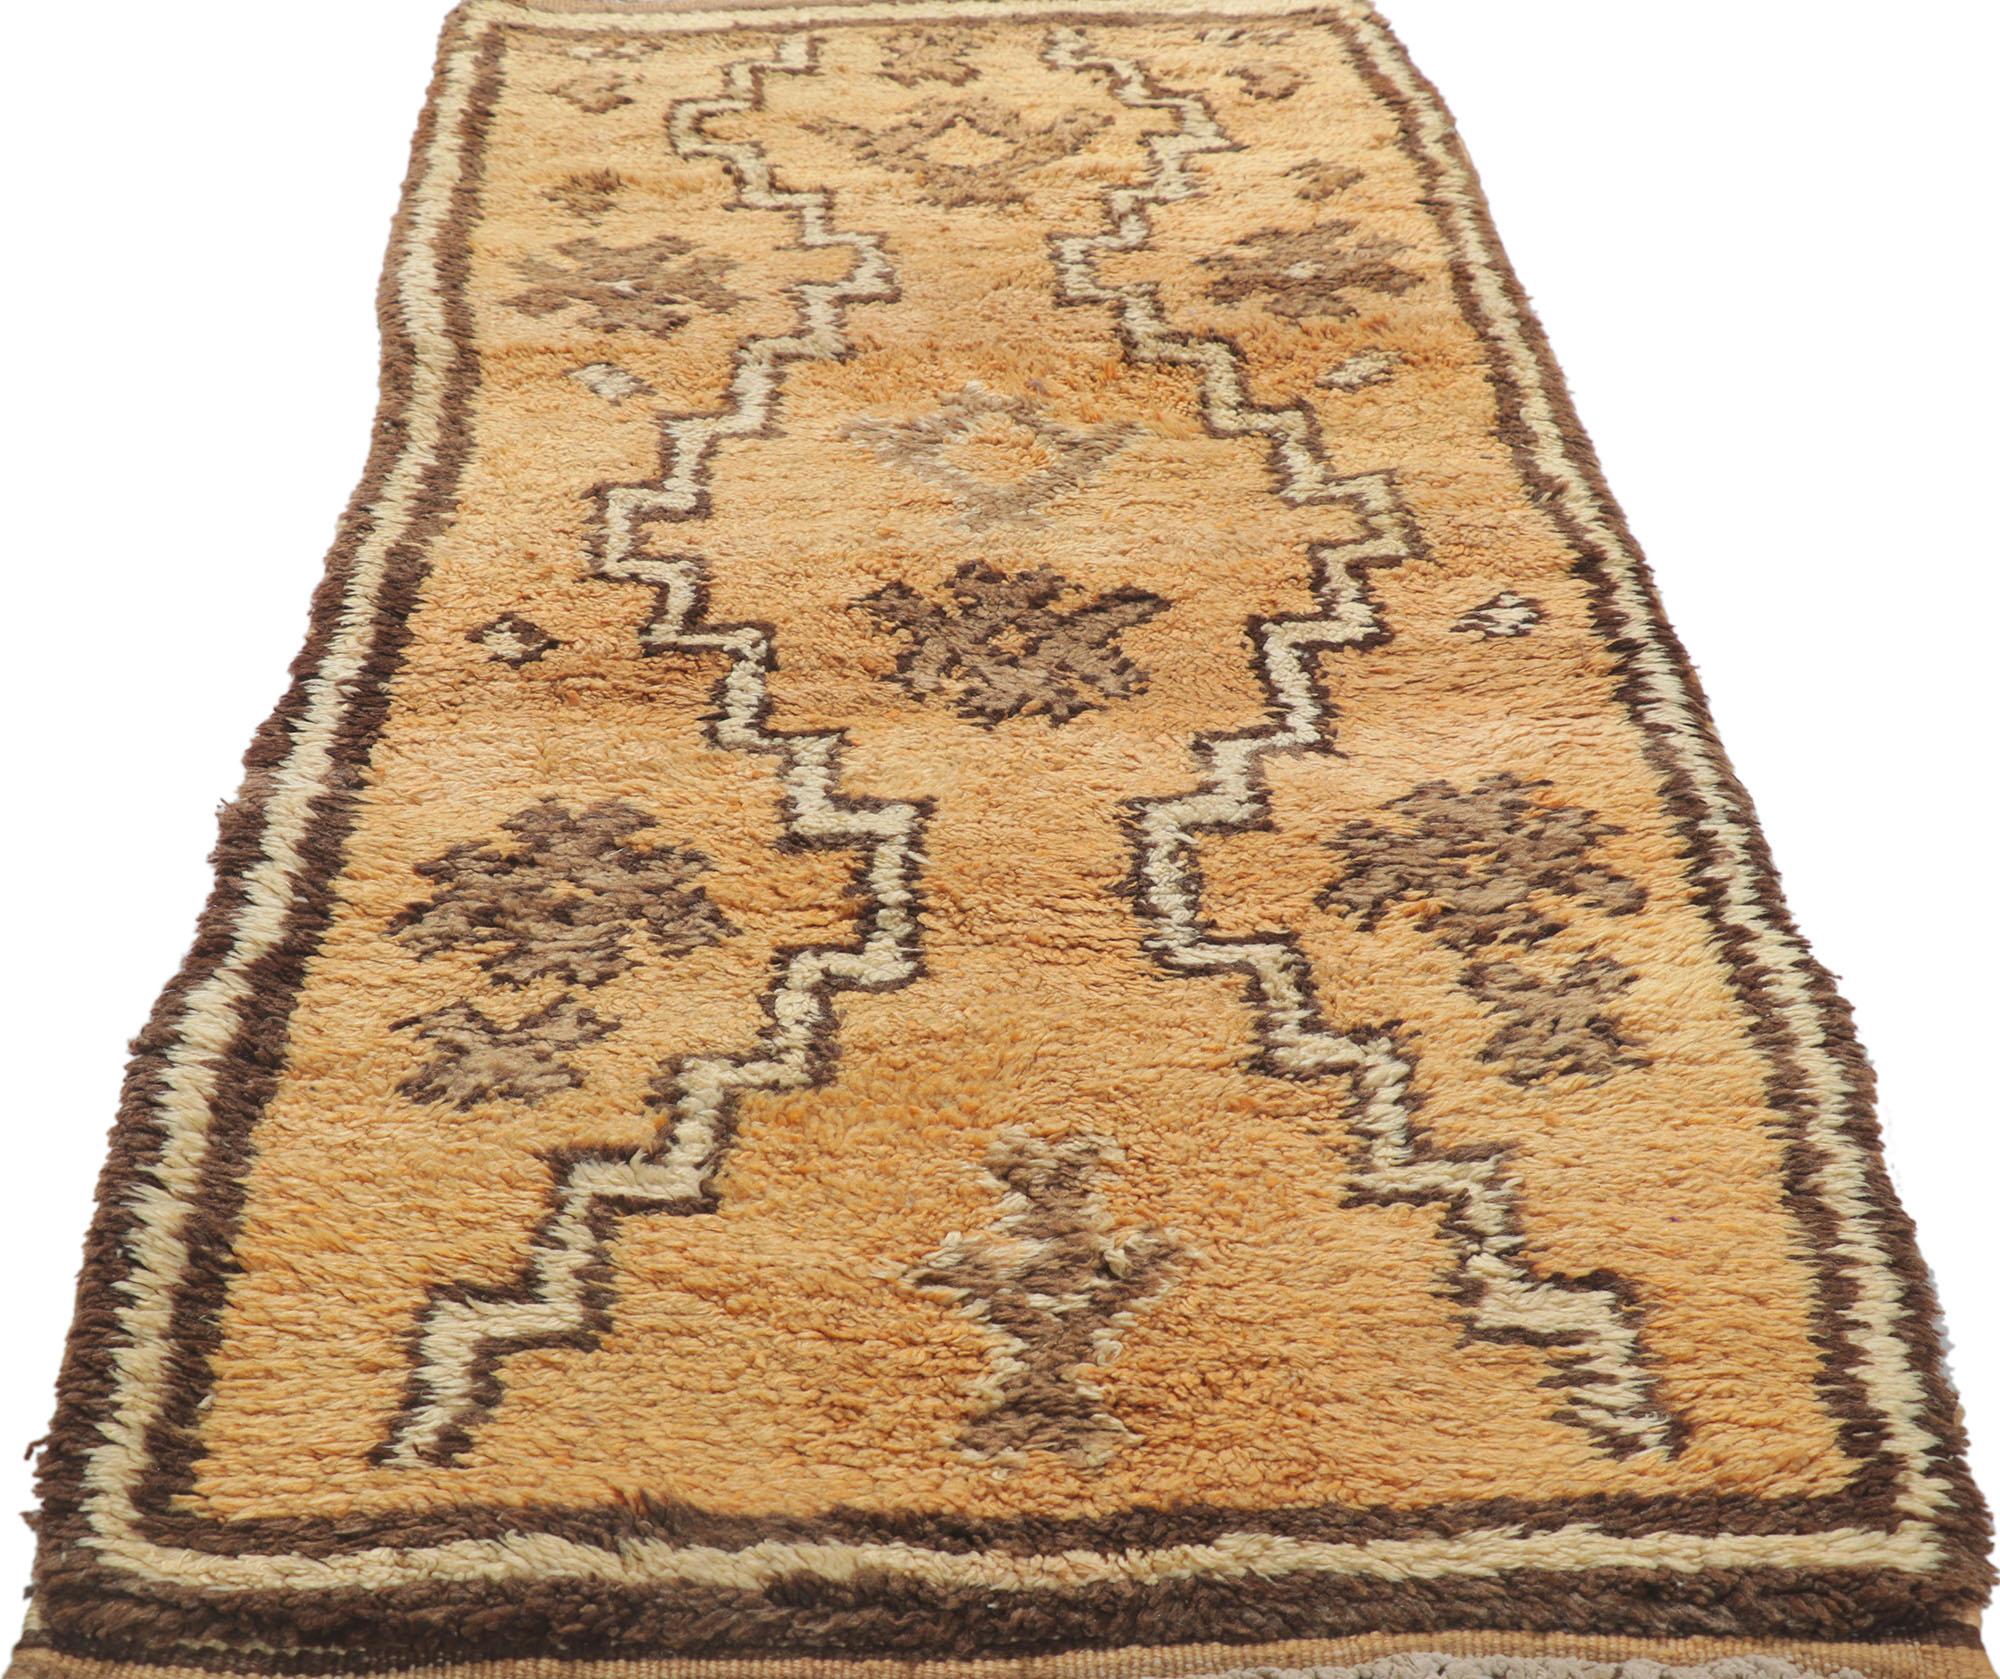 Hand-Knotted Vintage Berber Moroccan Rug, Organic Modern Collides with Nomadic Charm